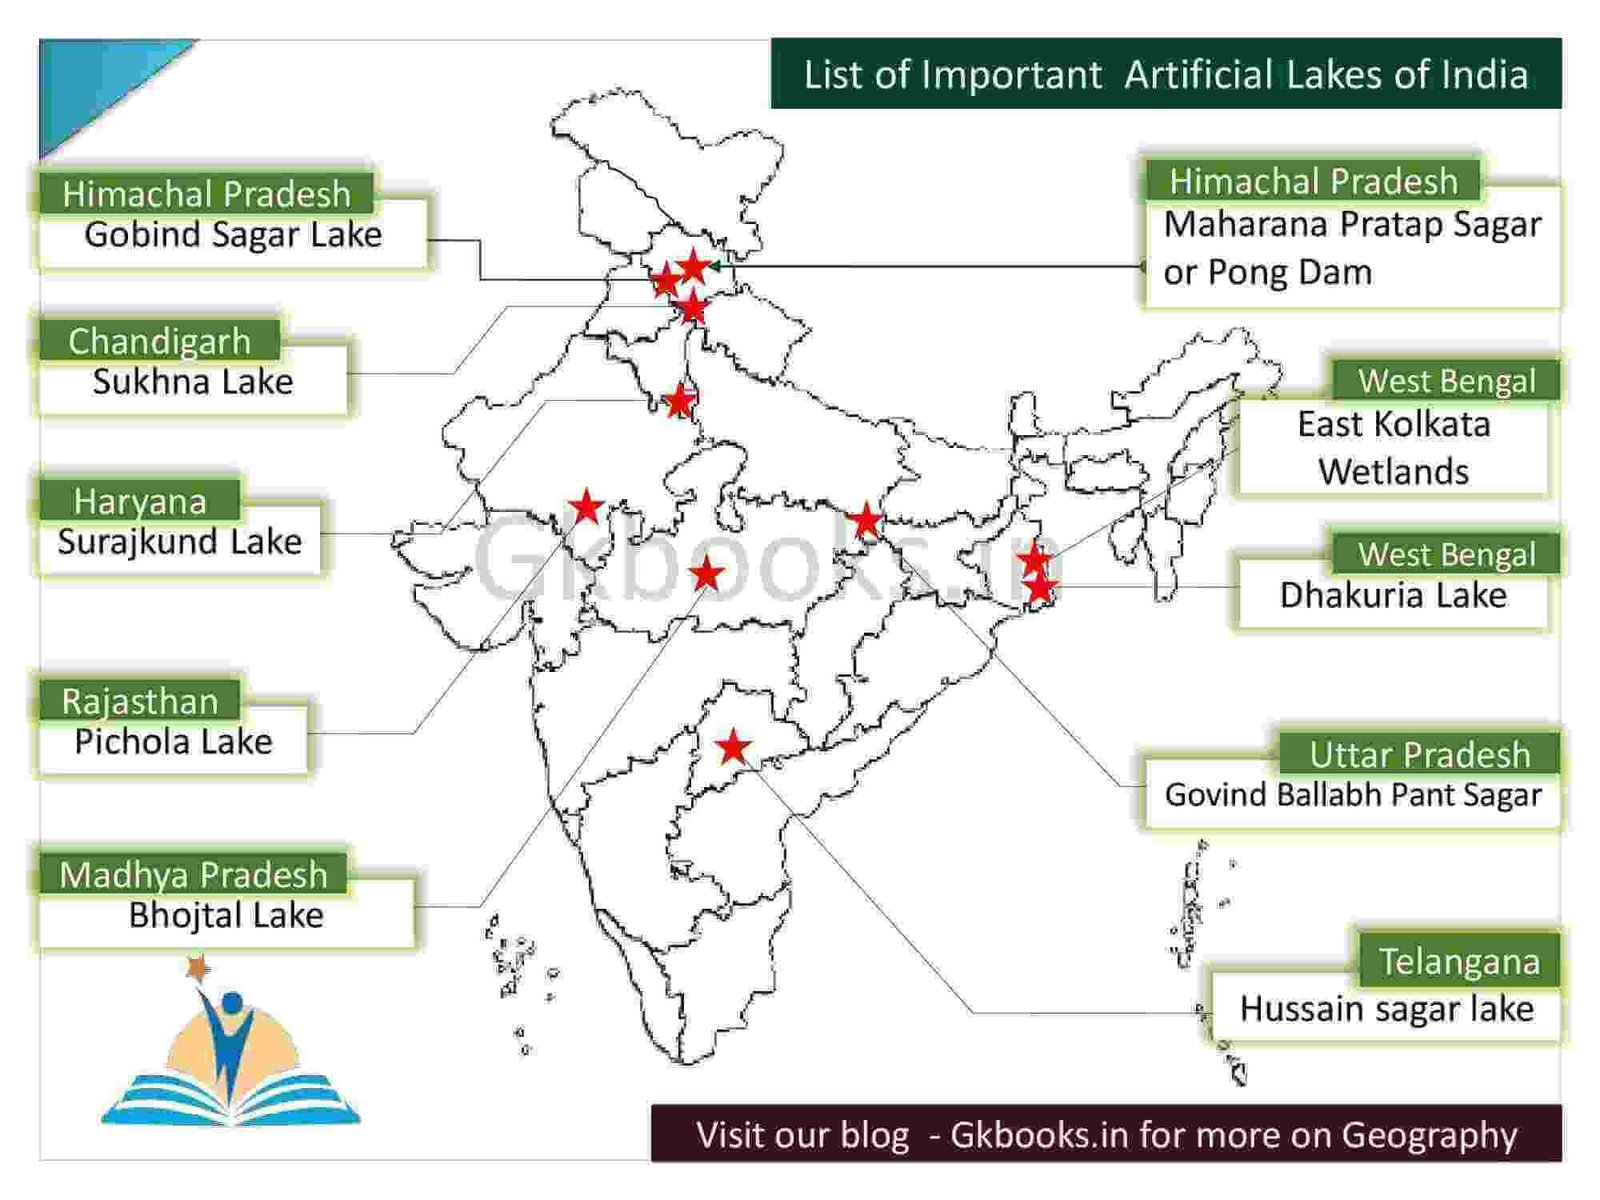 Artificial Lake of India